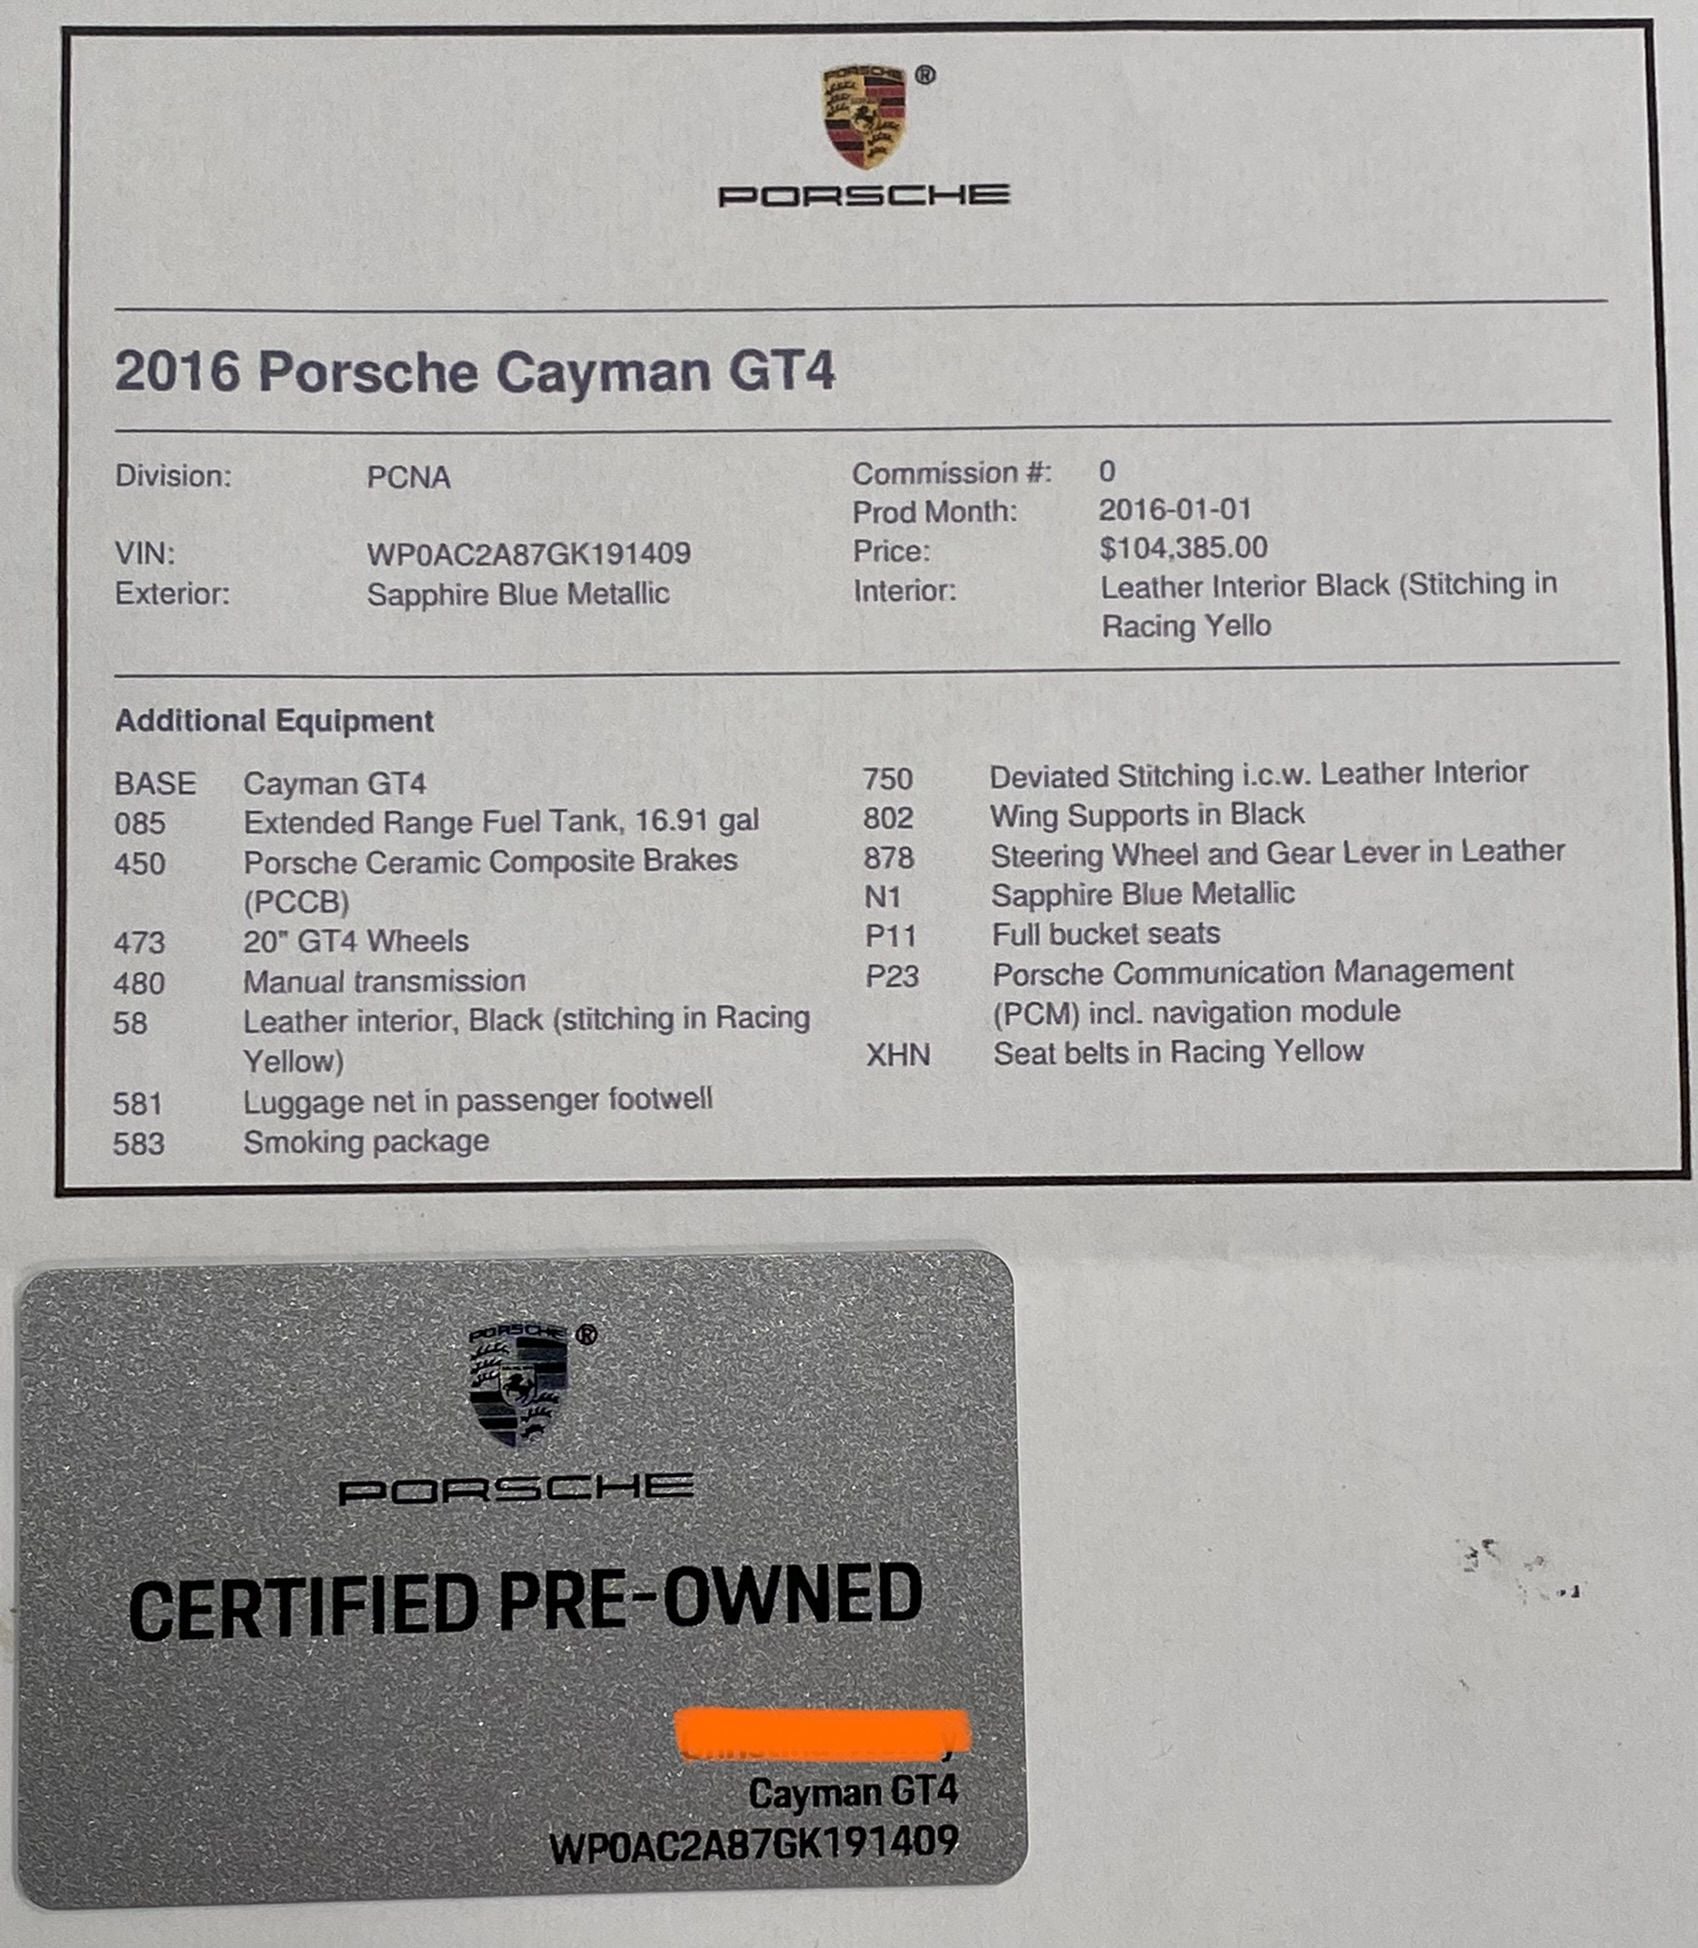 2016 Porsche Cayman GT4 - CPO 2016 Cayman GT4: Sapphire, PCCB, LWB - Used - VIN WP0AC2A87GK191409 - 9,655 Miles - 6 cyl - 2WD - Manual - Coupe - Blue - Denver, CO 80247, United States